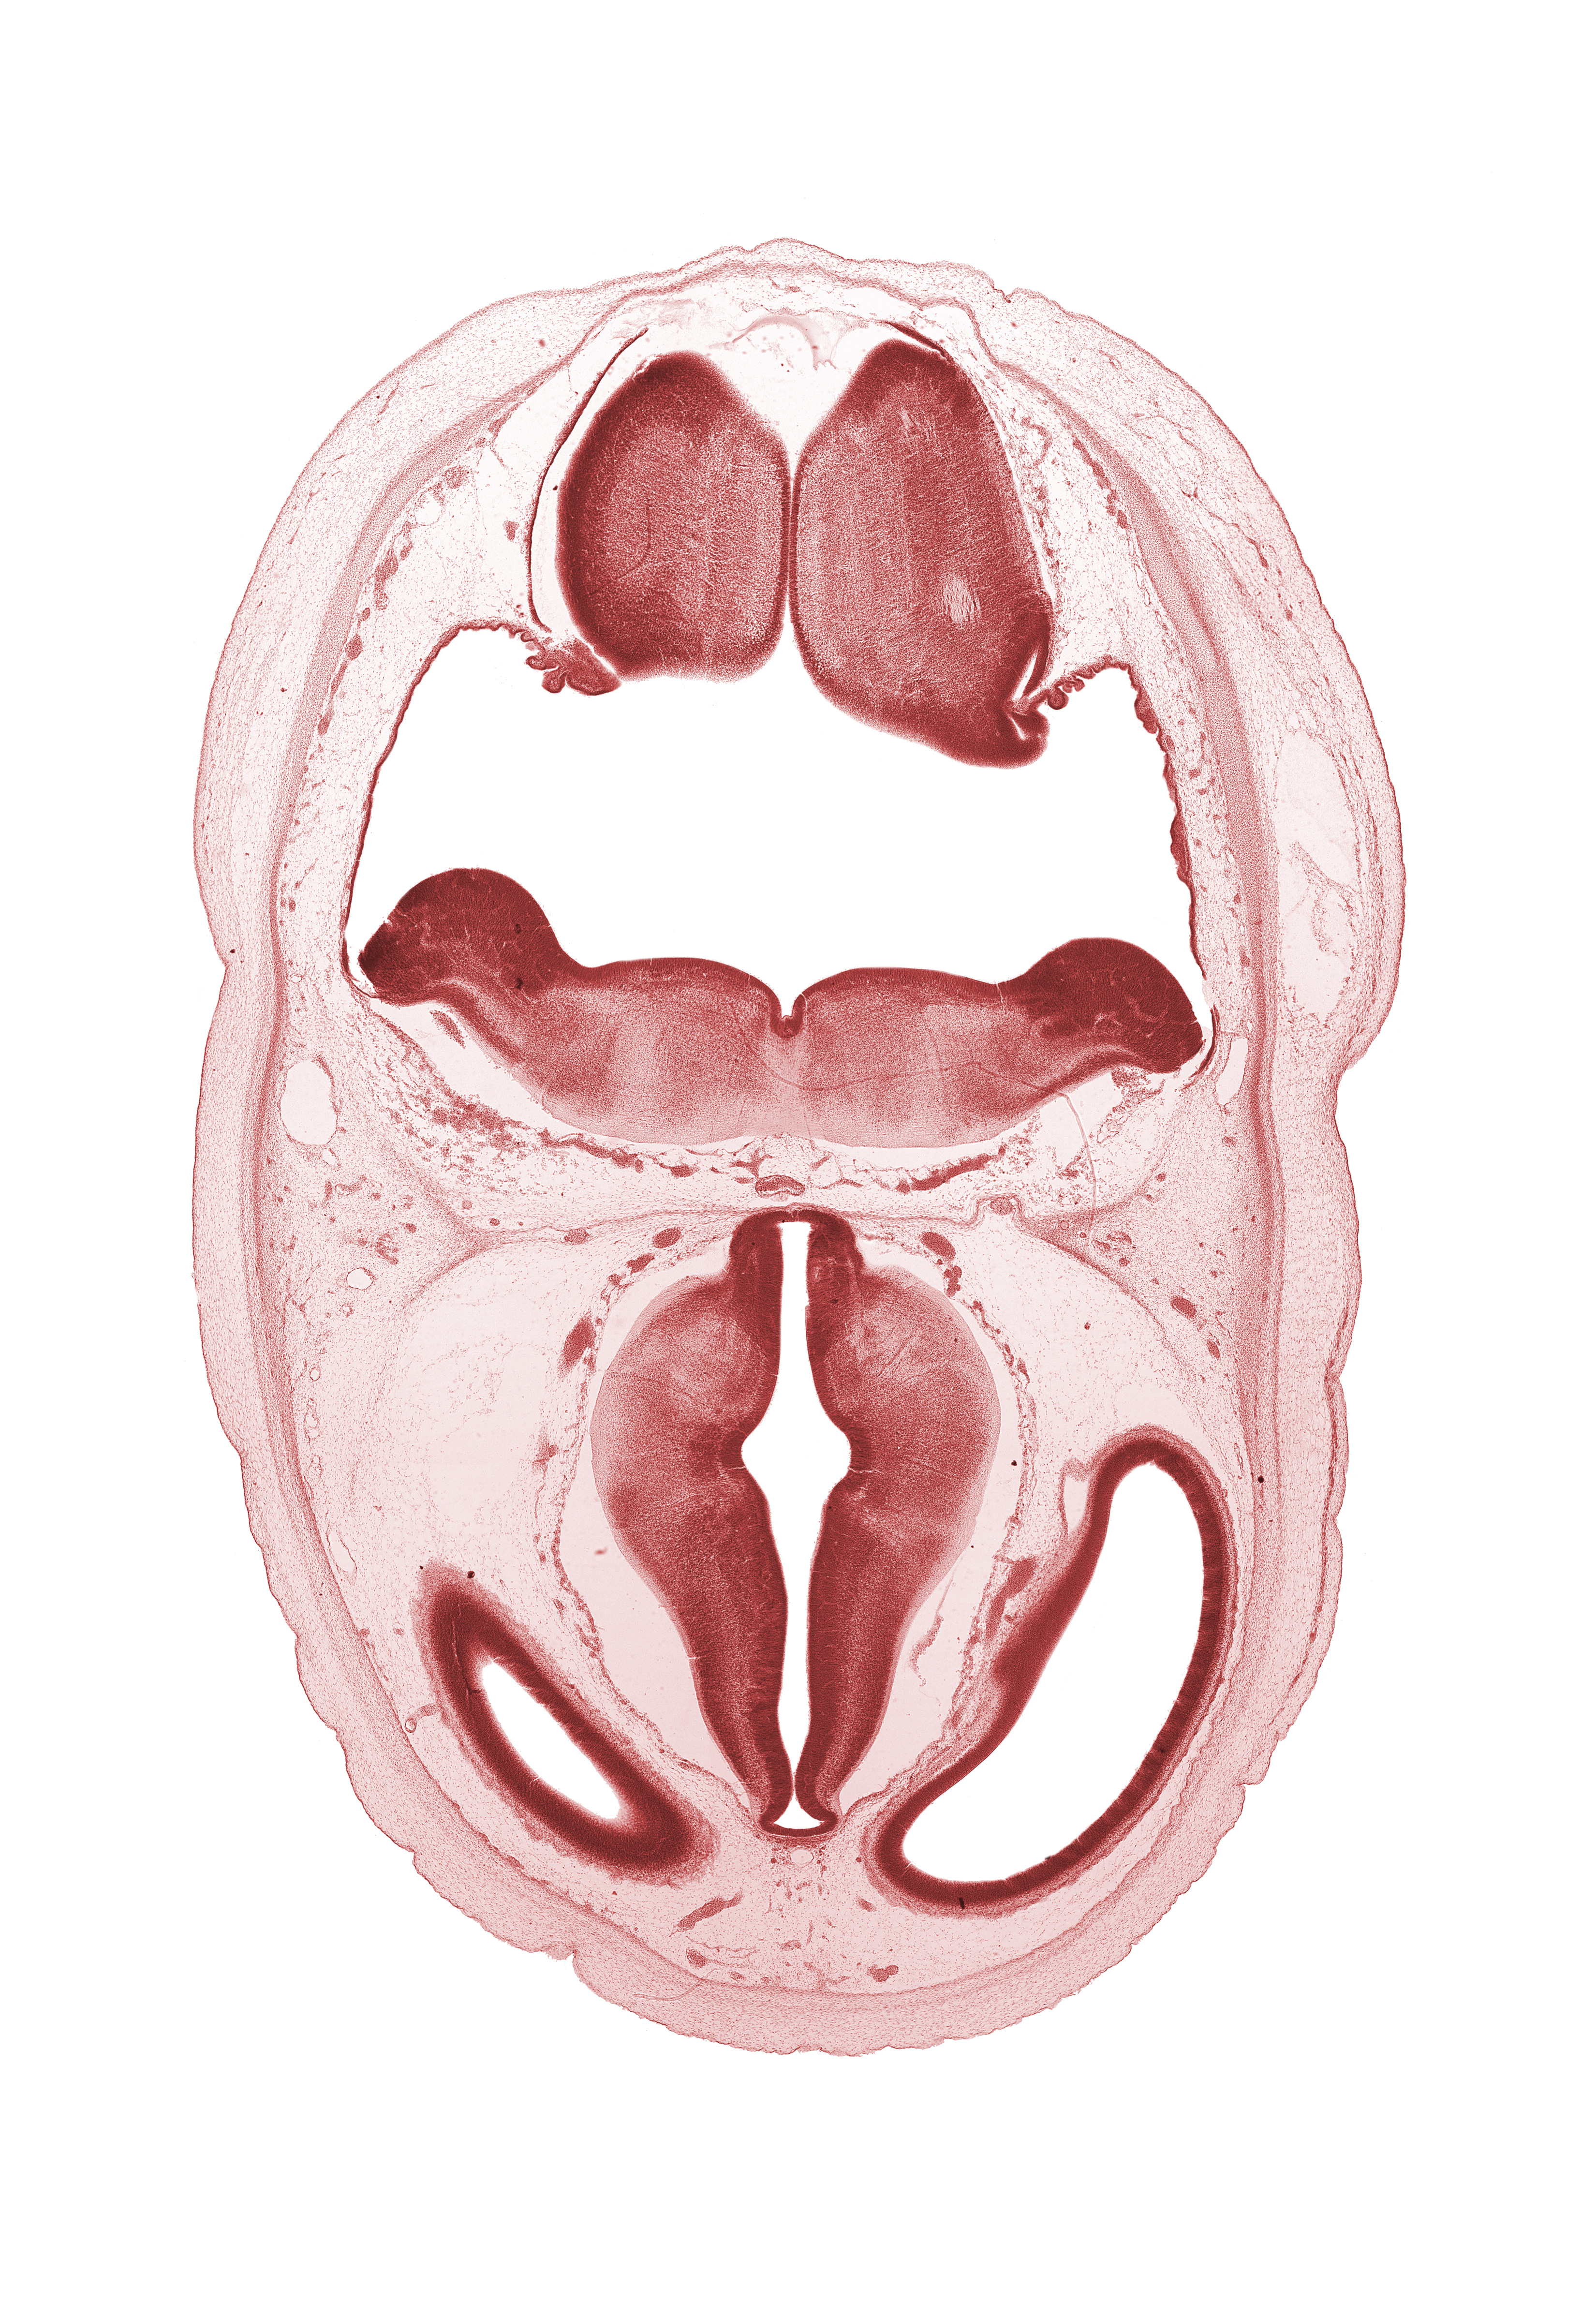 artifact separation(s), basilar artery, dural band for tentorium cerebelli, lateral ventricle, medial accessory olivary nucleus, oculomotor nerve (CN III), osteogenic layer, pons region (metencephalon), posterior communicating artery, rhombencoel (fourth ventricle), third ventricle, venous plexus(es)